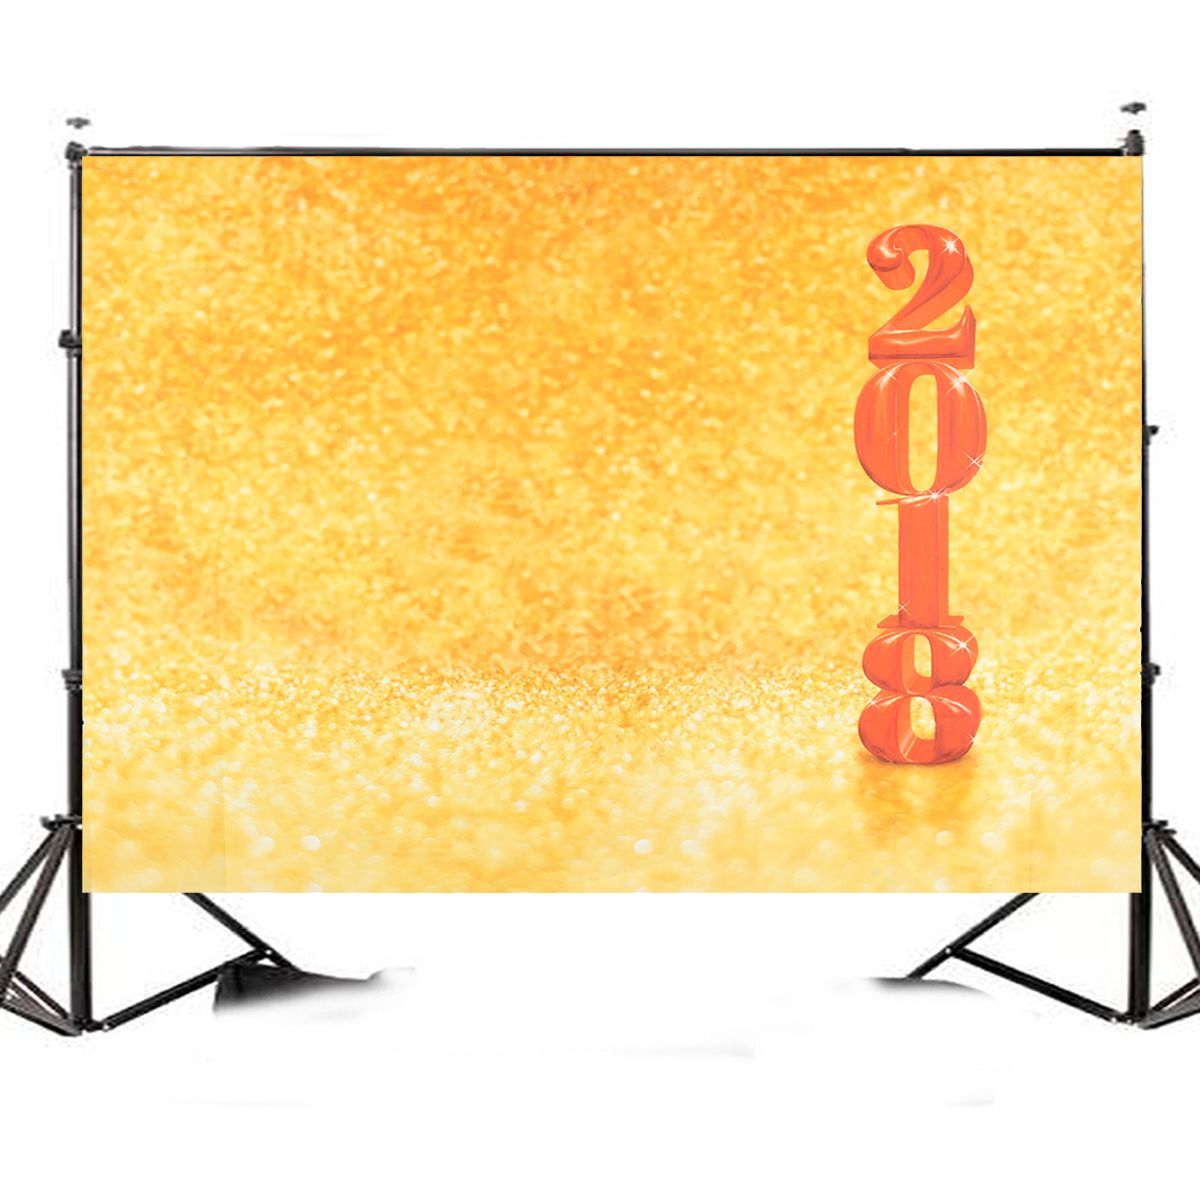 7x5ft-New-Year-Golden-Bright-Stars-Photography-Backdrop-Studio-Prop-Background-1377383